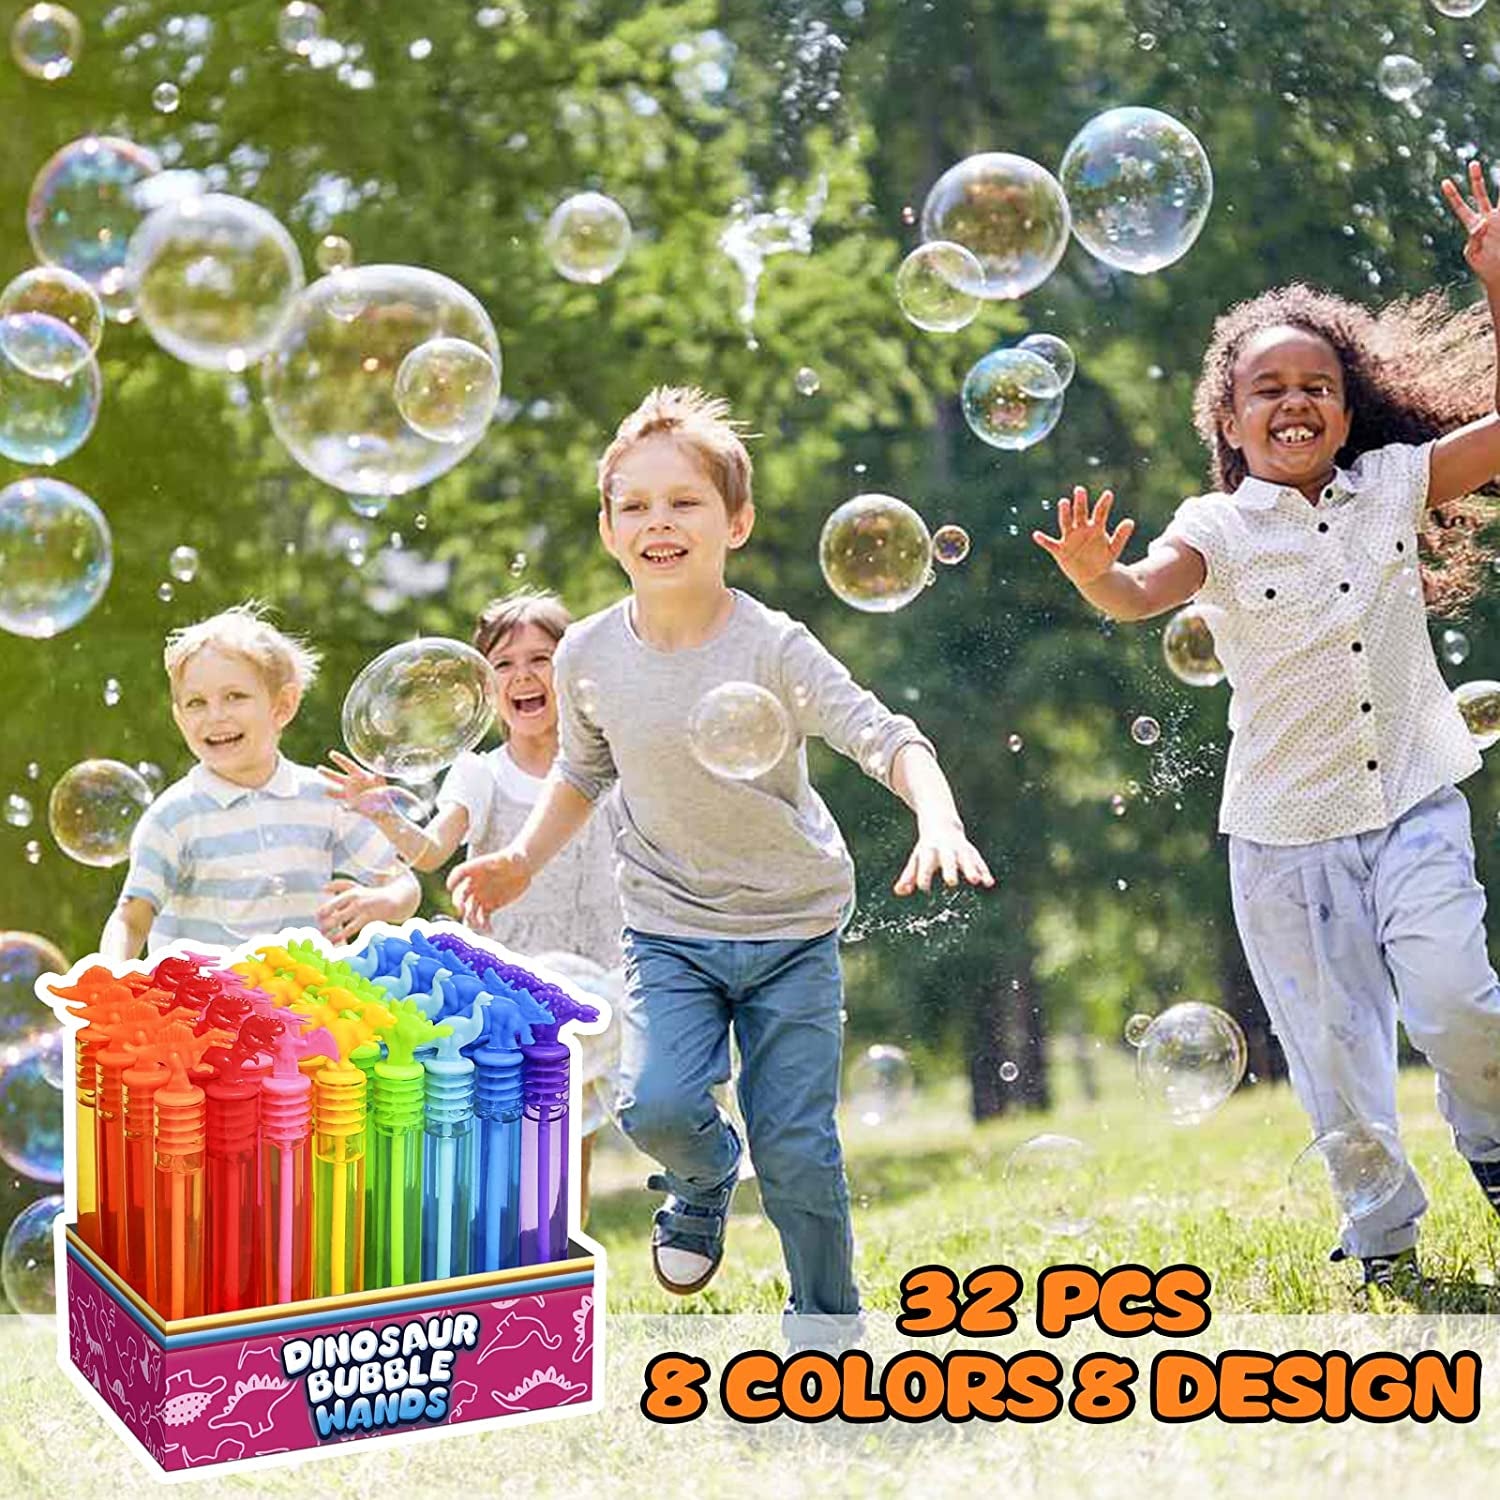  32-Pack Dinosaur Bubble Wands - Fun Party Favors with Gift Box